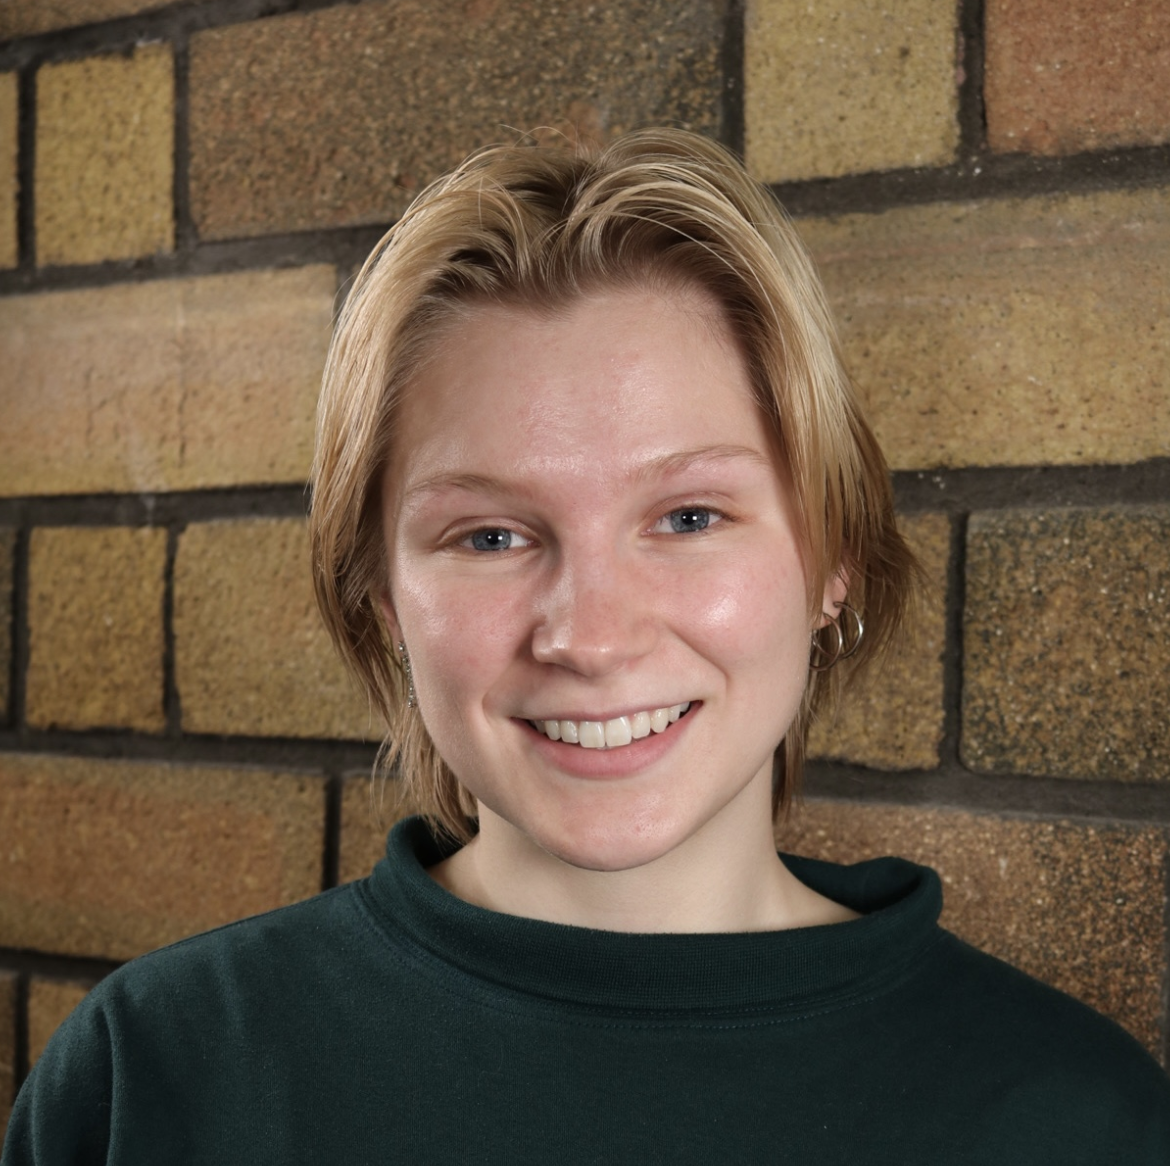 Portrait of young person with short blond hair and green sweater smiling at viewer. Brick wall in background.